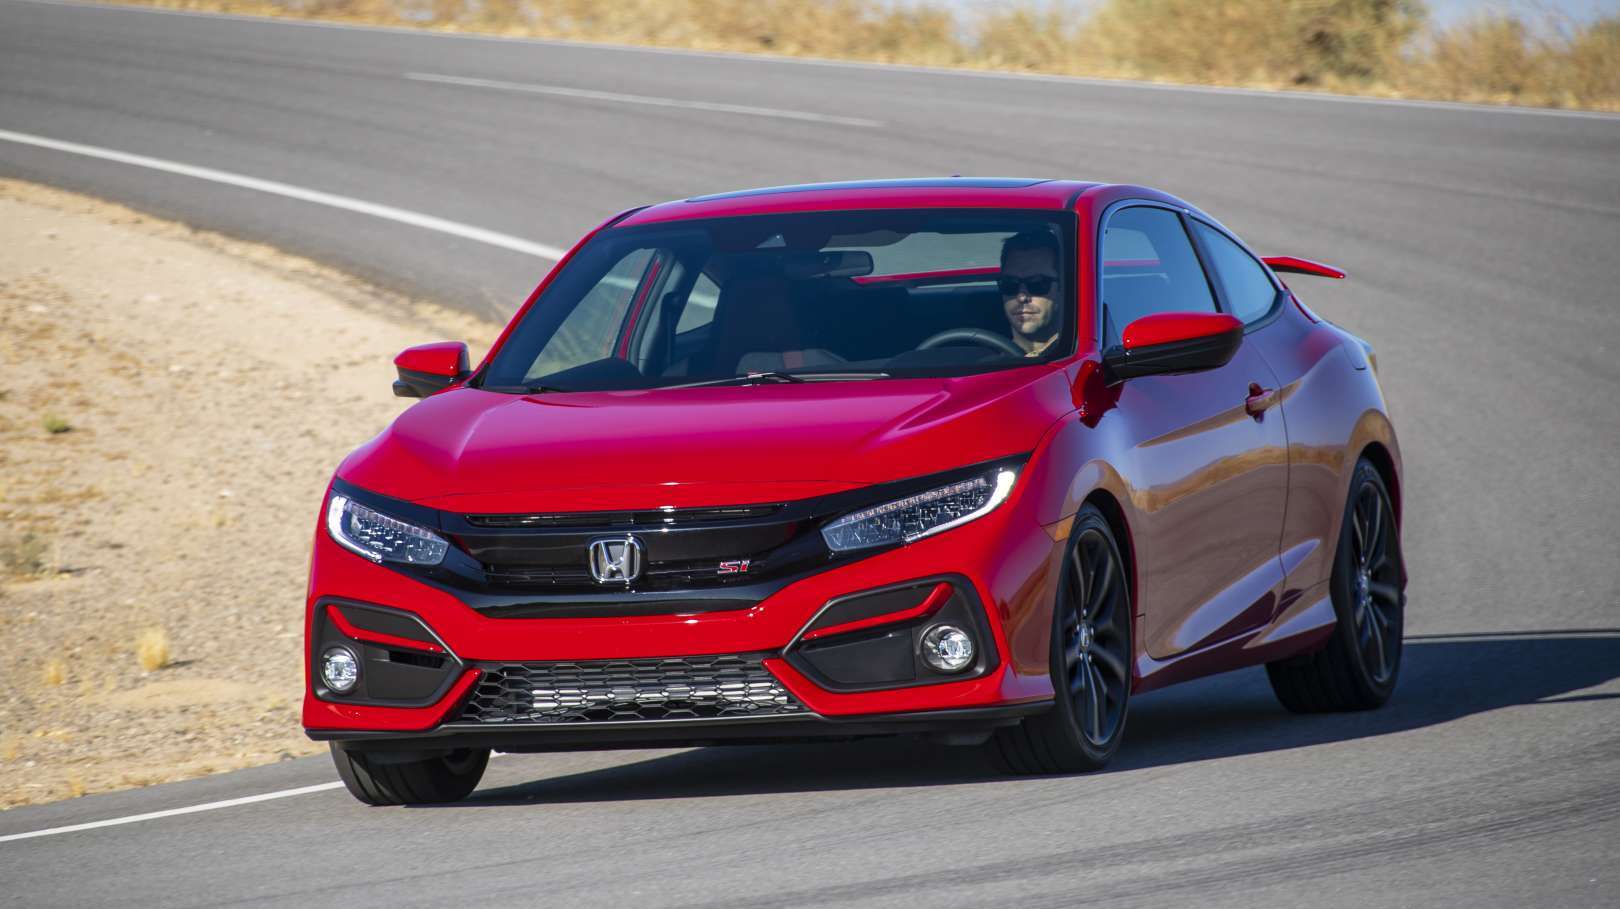 2020 Honda Civic Si Sporty Civic Receives Styling Updates